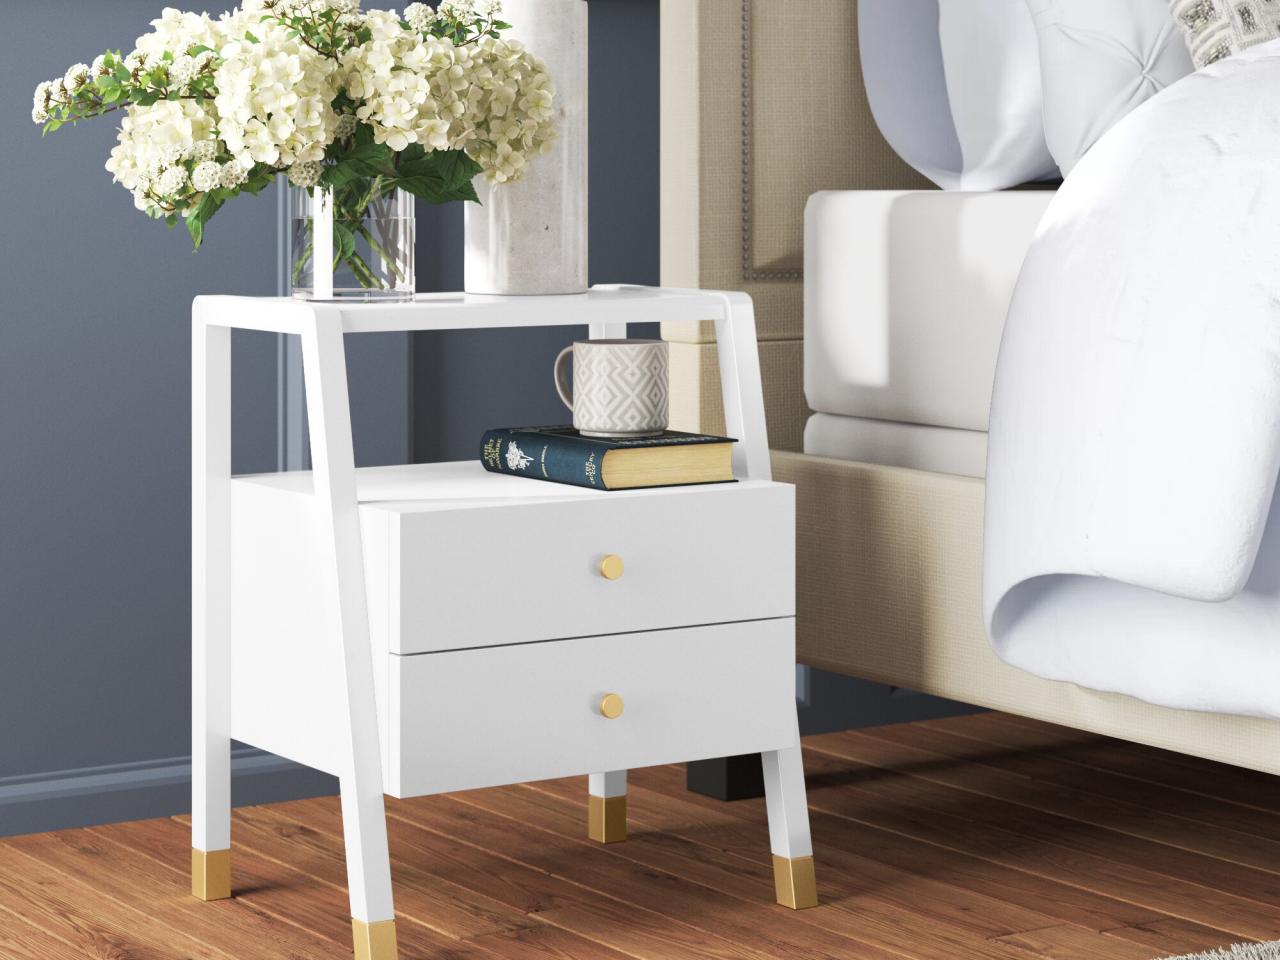 https://hgtvhome.sndimg.com/content/dam/images/hgtv/products/2022/1/21/rx_wayfair_swaney-solid-wood-side-table.jpeg.rend.hgtvcom.1280.960.suffix/1642801284025.jpeg